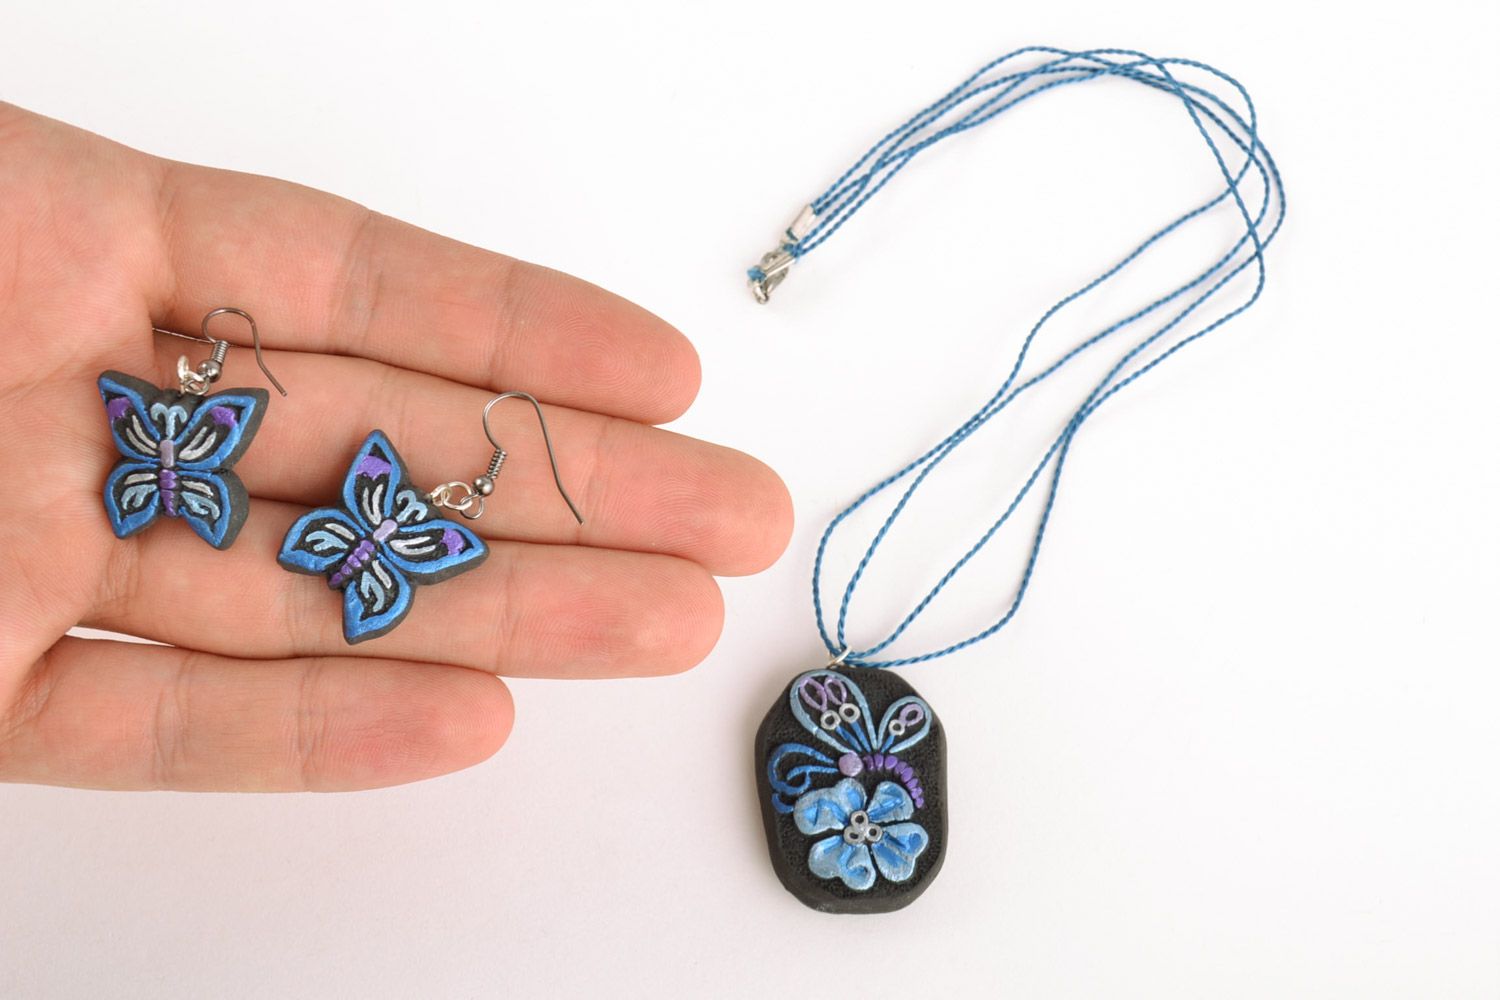 Handmade painted ceramic jewelry set 2 items clay earrings and pendant in the shape of butterflies photo 2